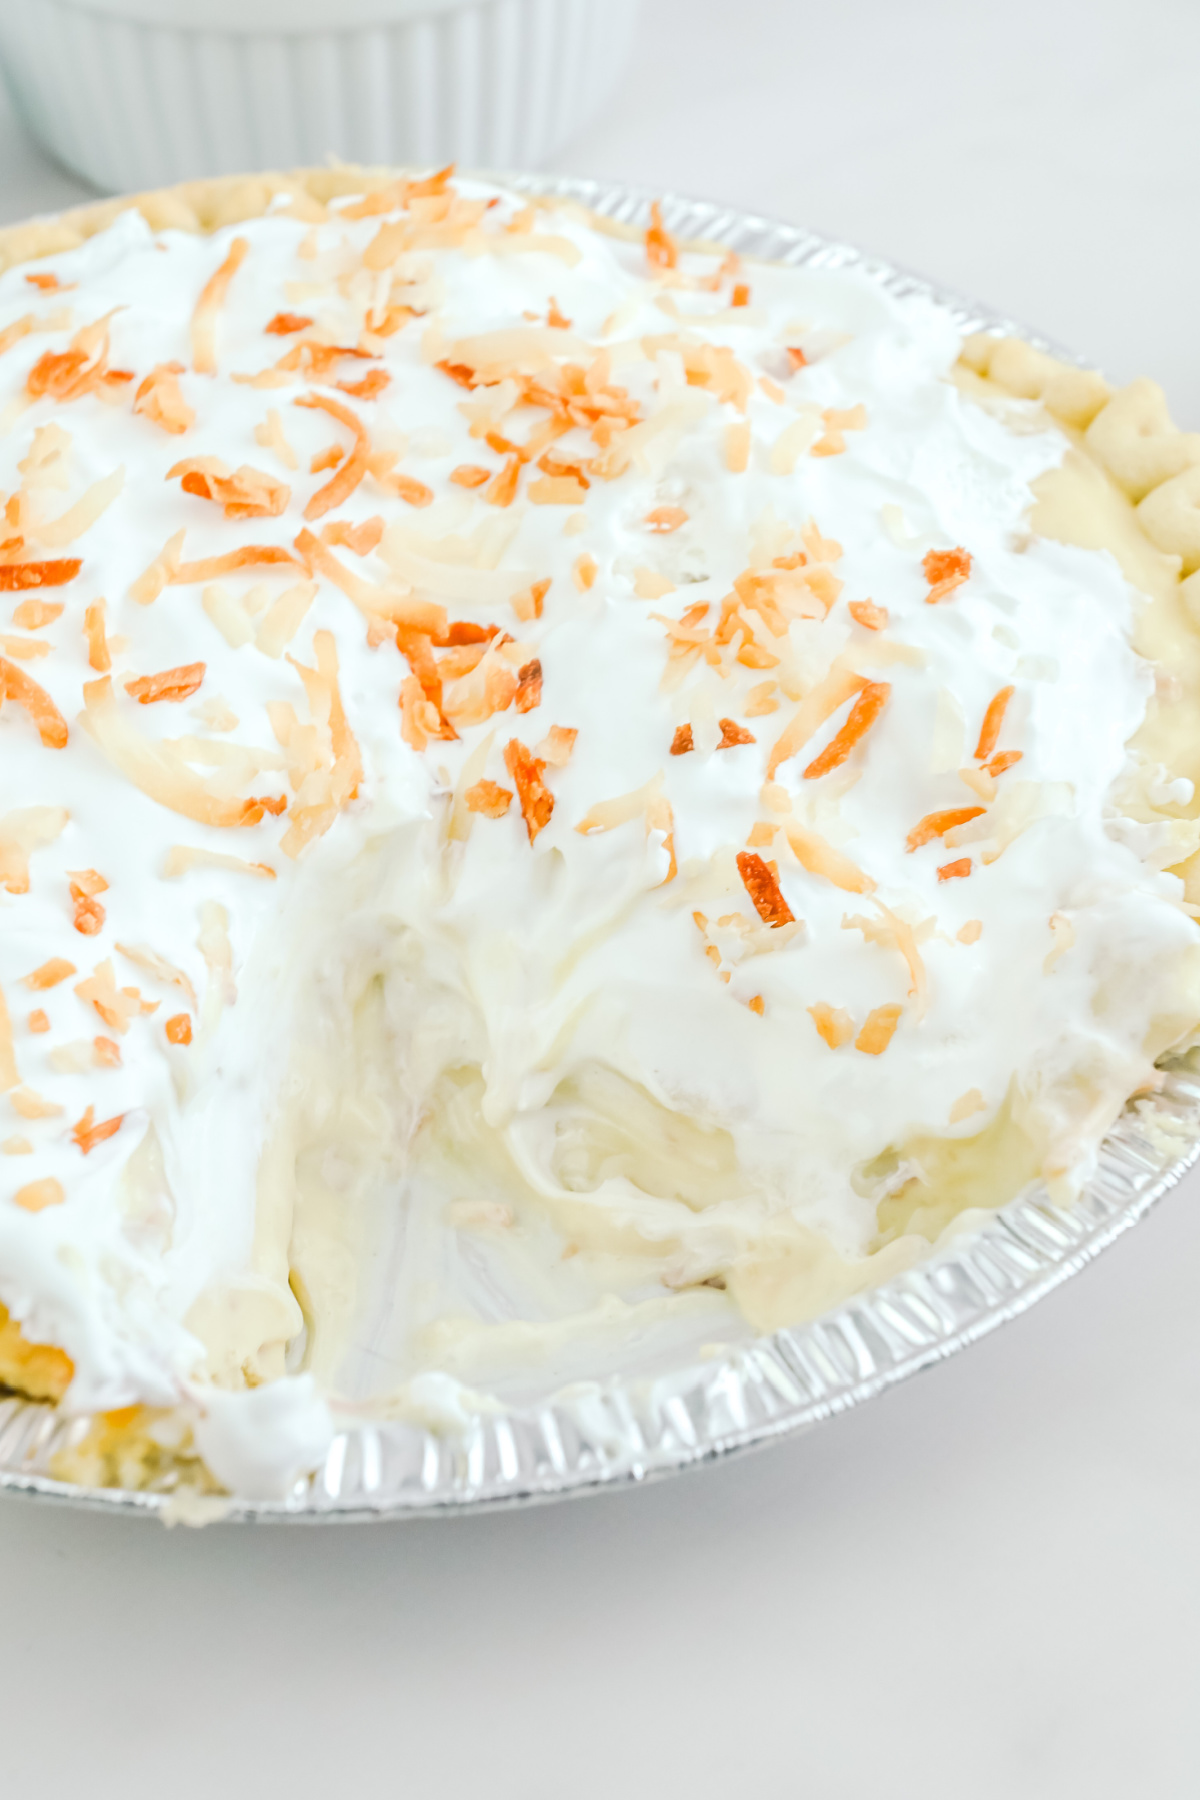 A coconut pie with whipped cream and coconut on top.